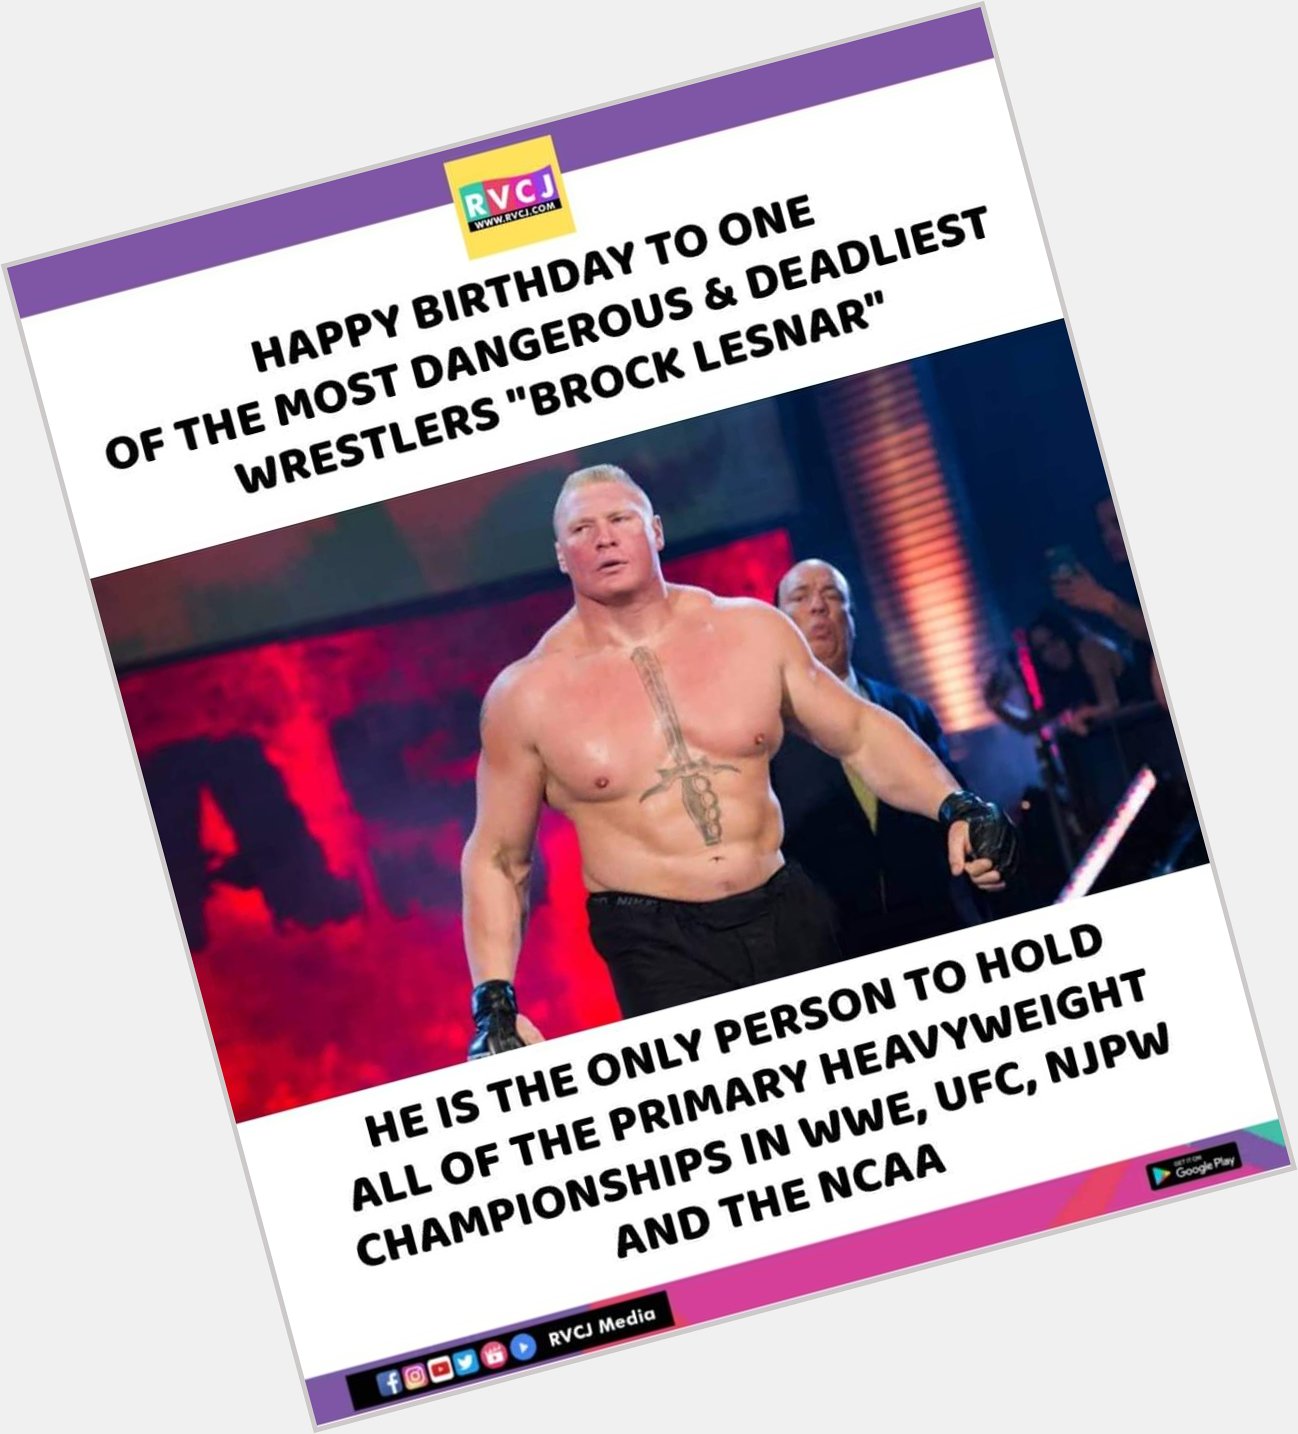 Happy birthday to one of the most dangerous wrestler Brock Lesnar. 